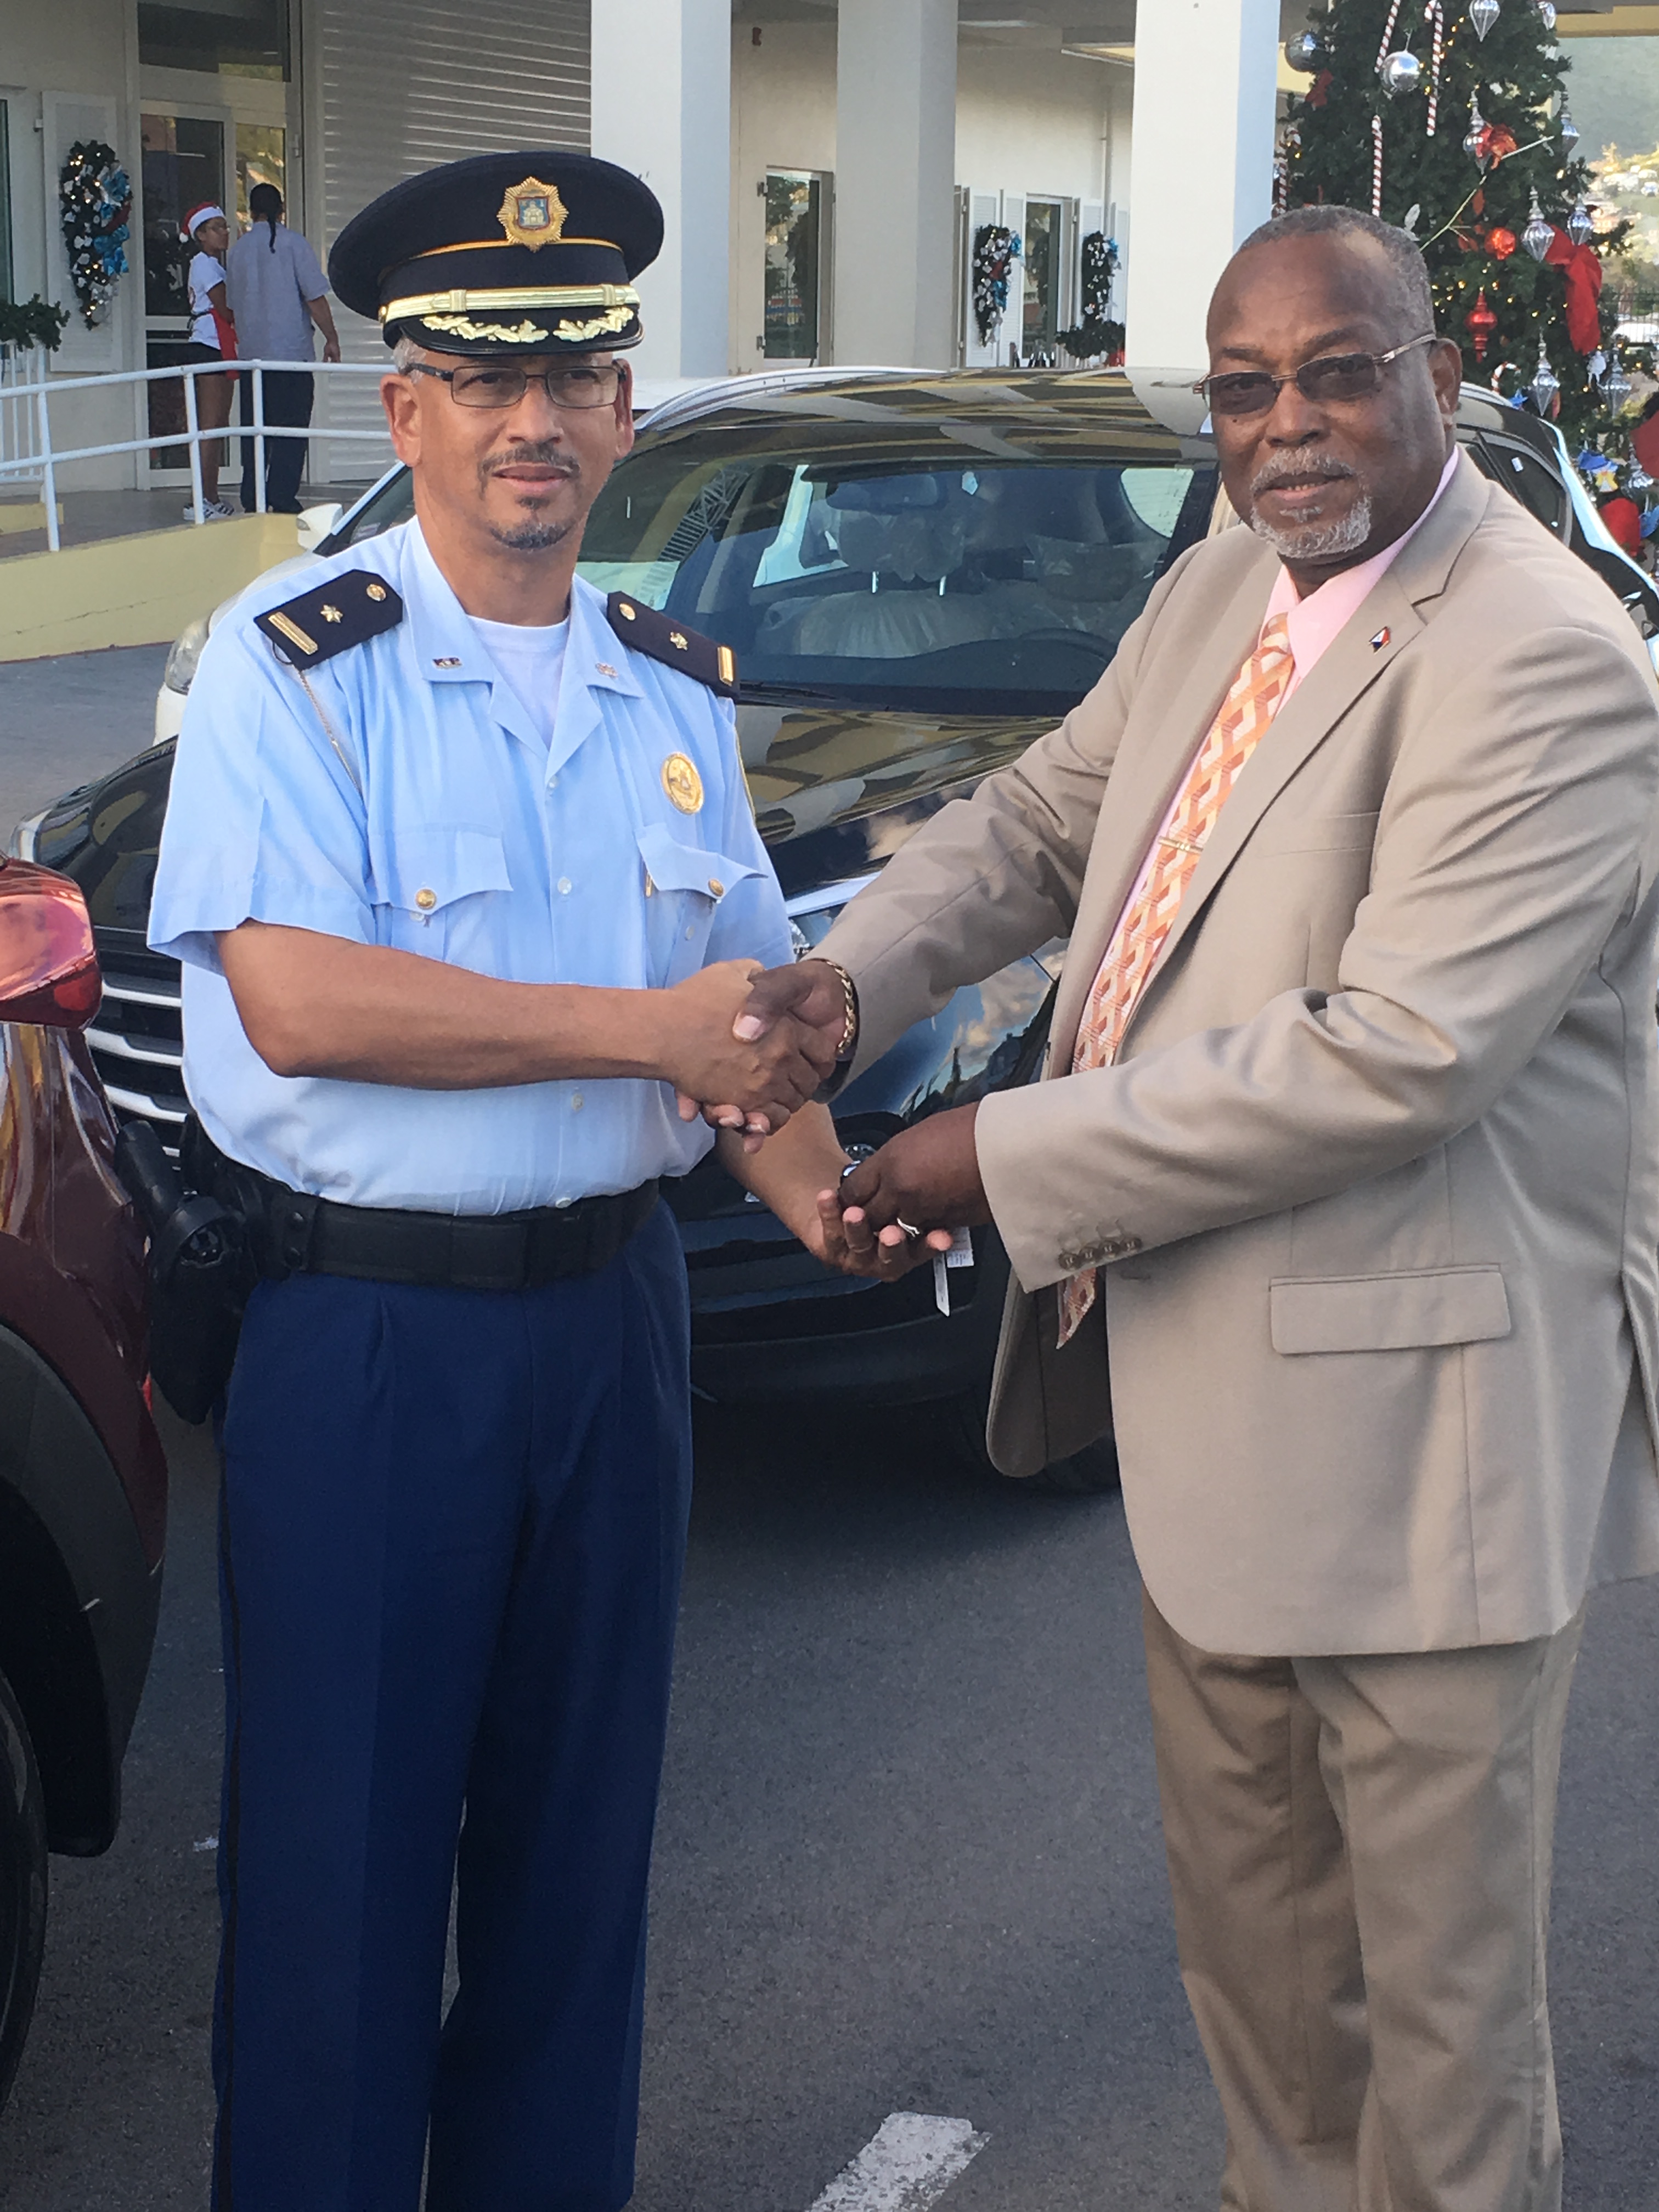 Gout Receives keys for new cars